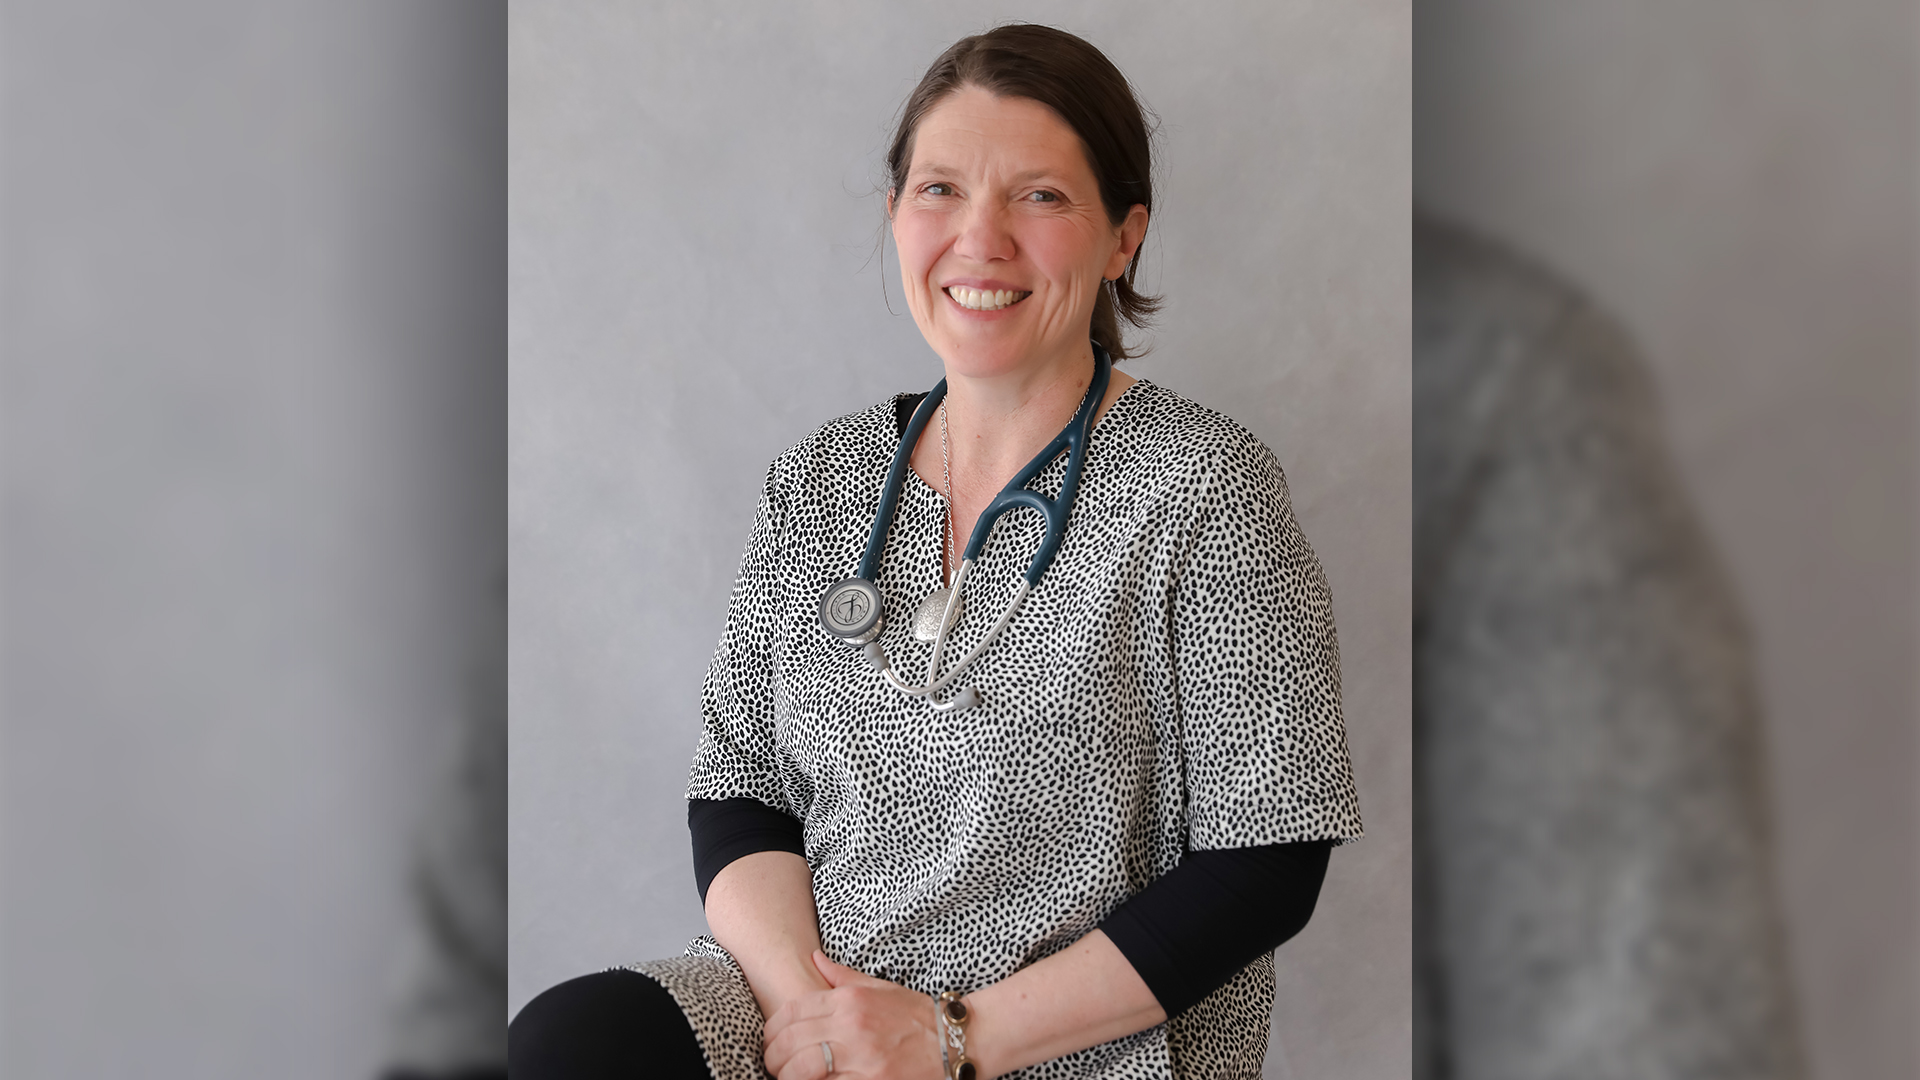 Director of Emergency Medicine Georgina Hayden sits with her hands clasped together on her lap and is smiling. She wears a black and white spotted shirt, a stethoscope and has her brown hair tied back in a low bun.